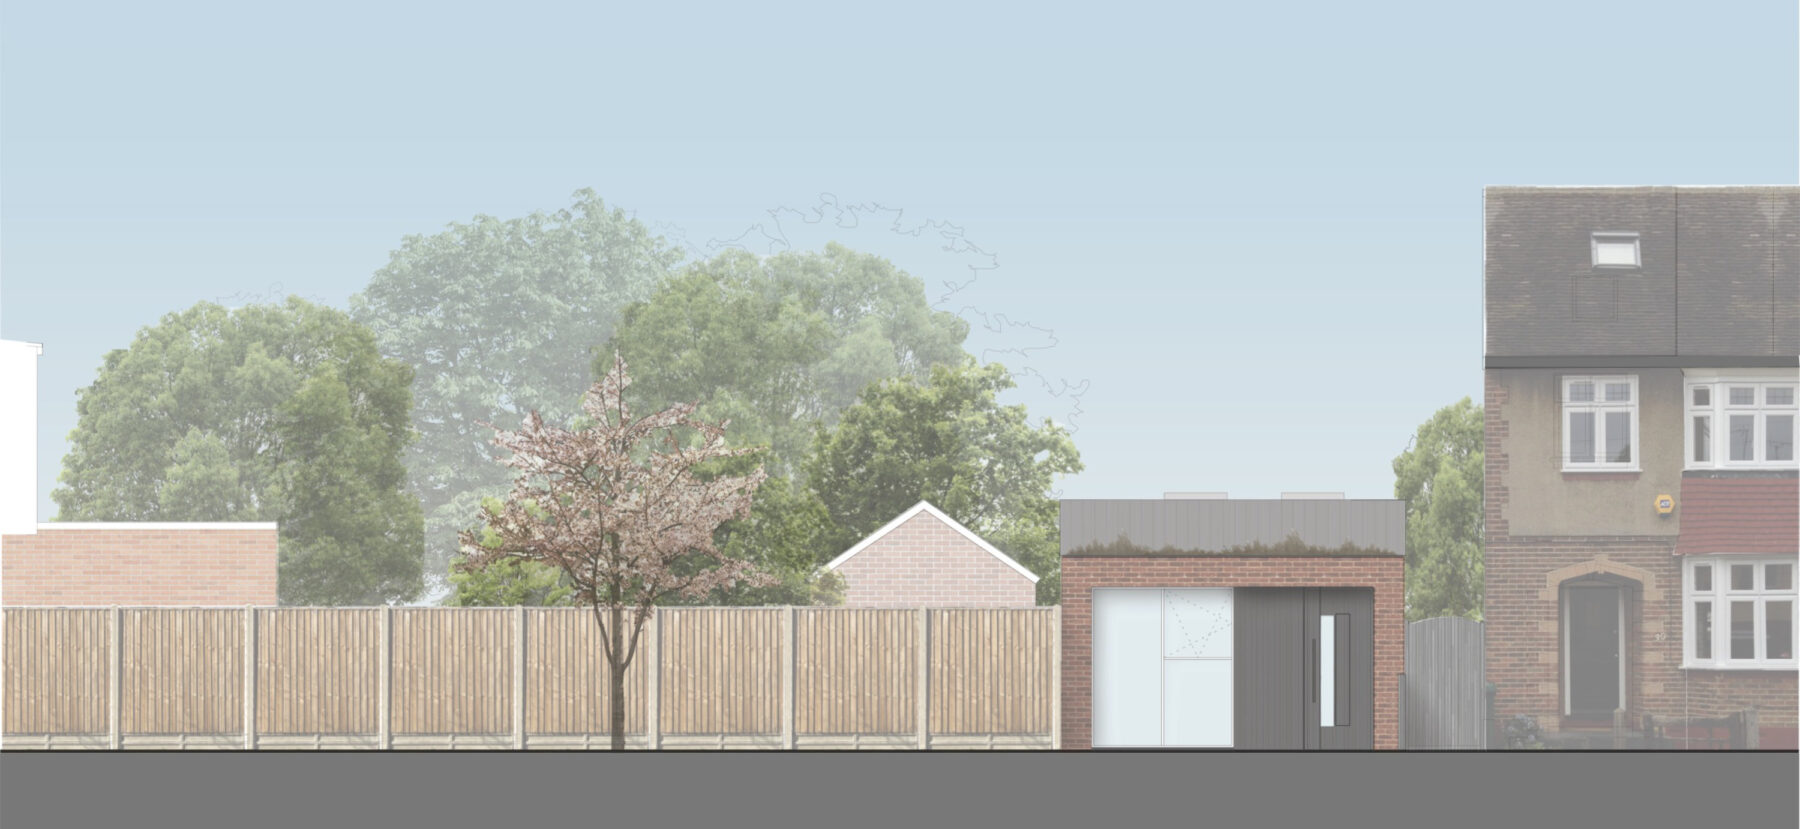 Elevation visualisation of the new house from the street